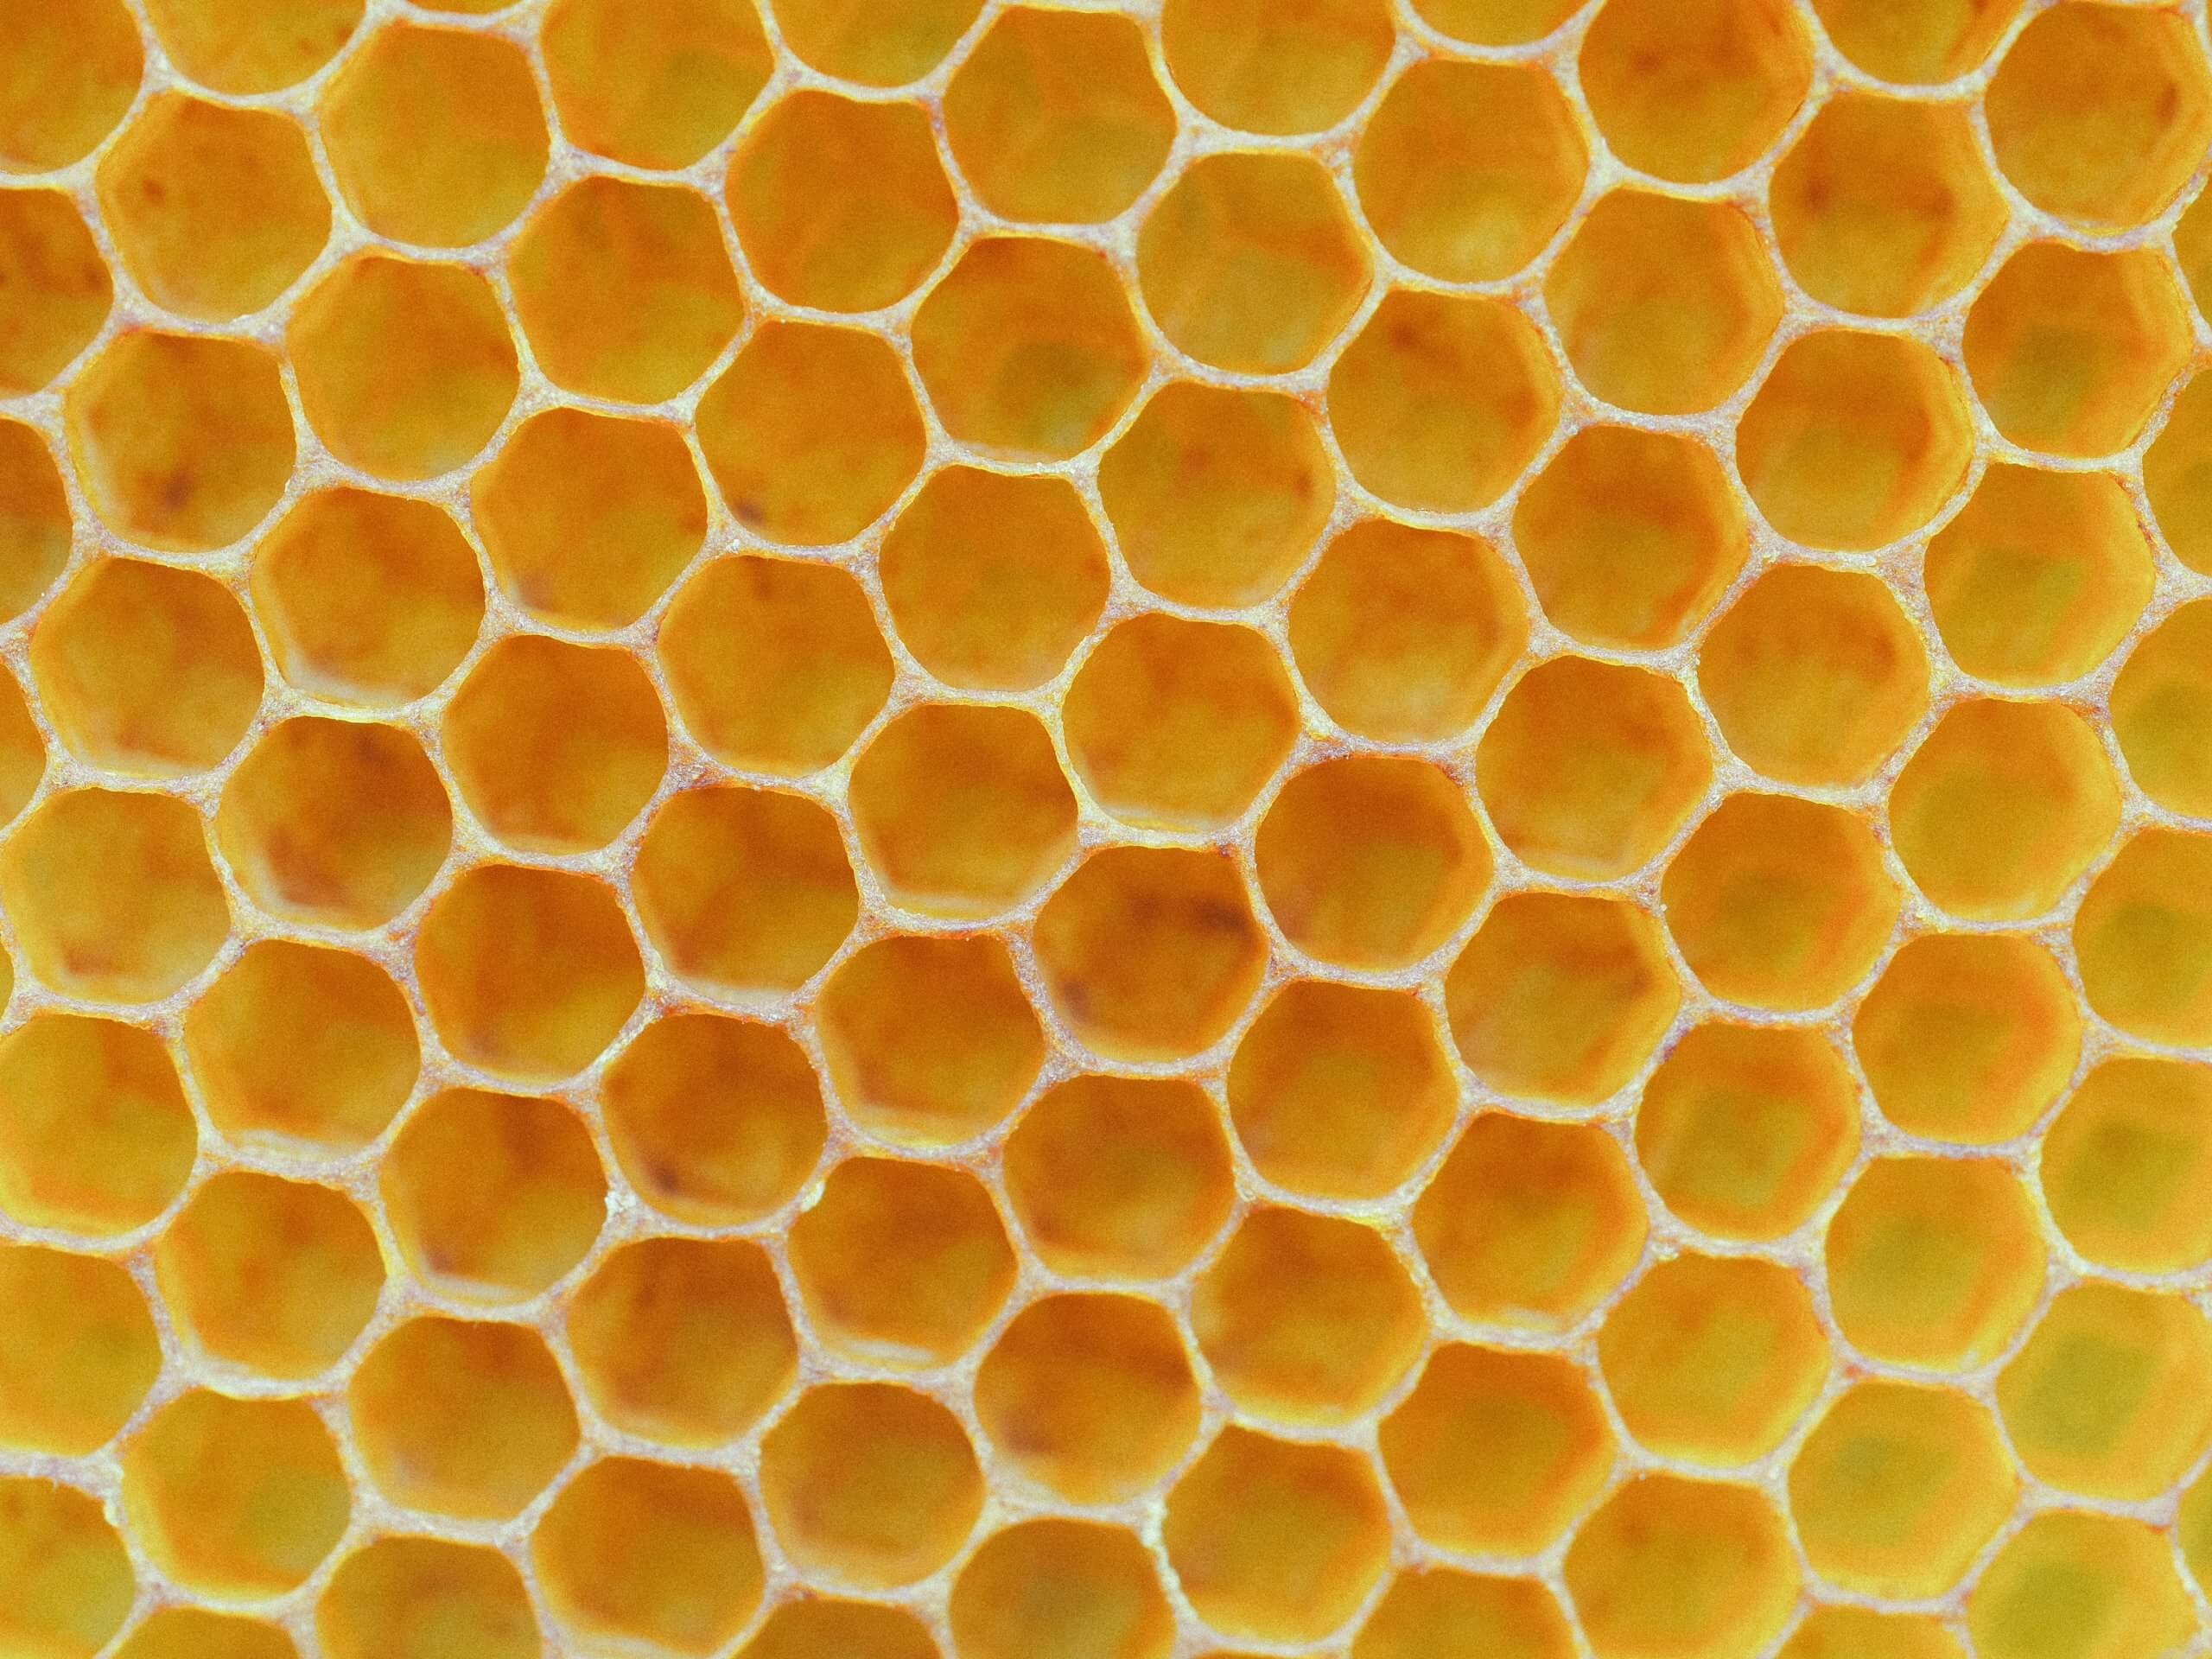 Why Do Honeycombs Look That Way?